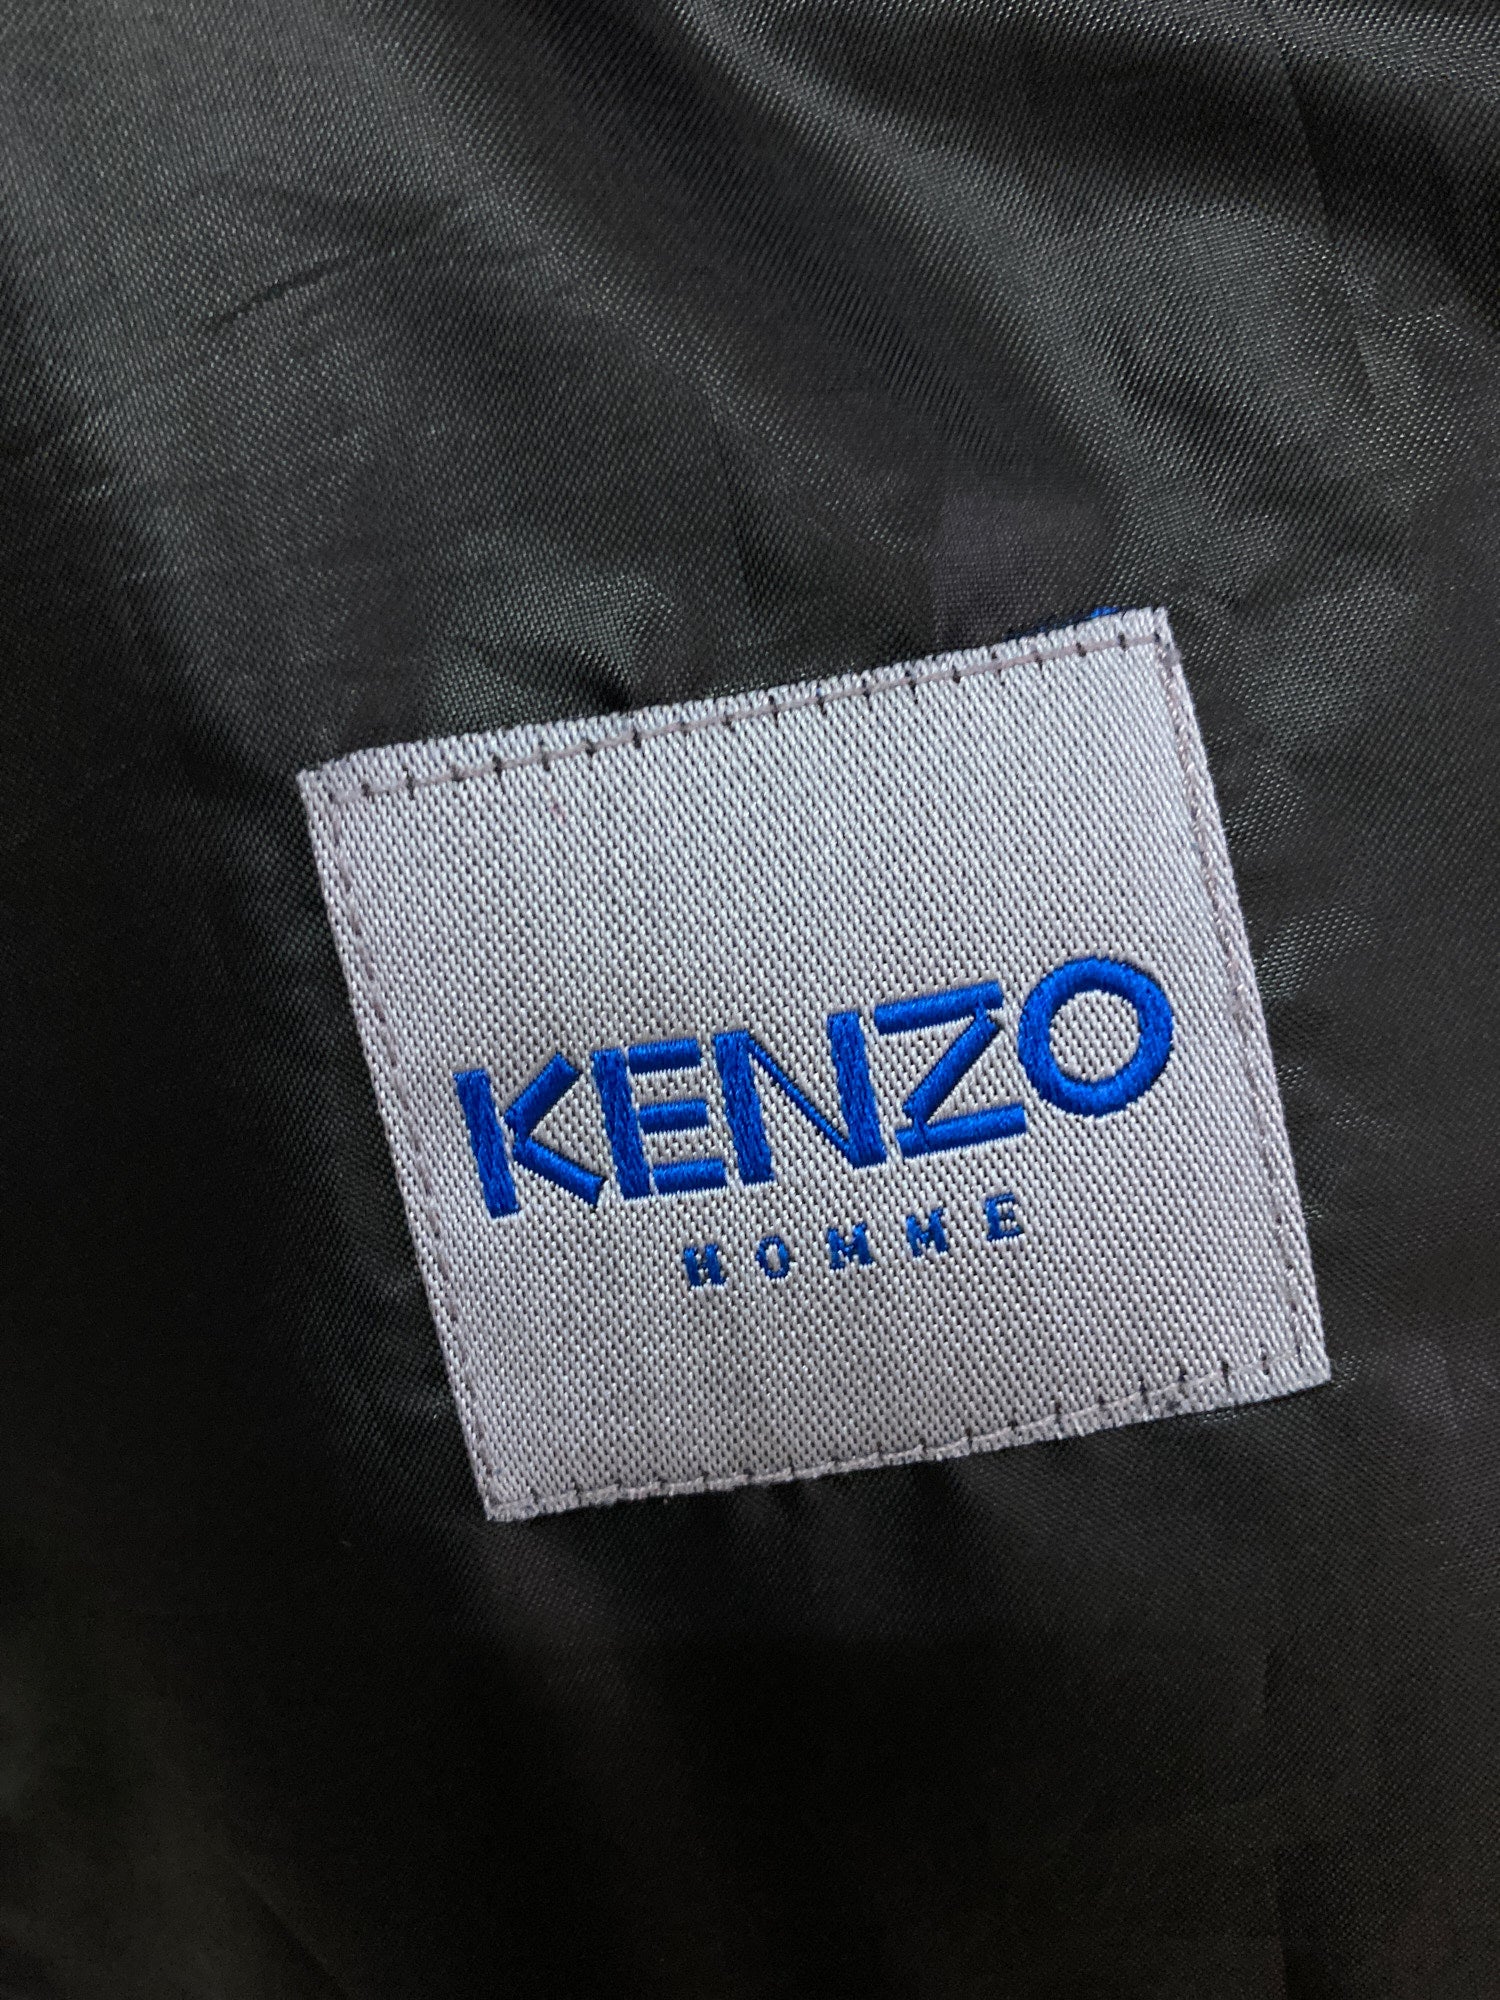 Kenzo Homme 1990s silver down puffer jacket with clear plastic hood - size 2 M